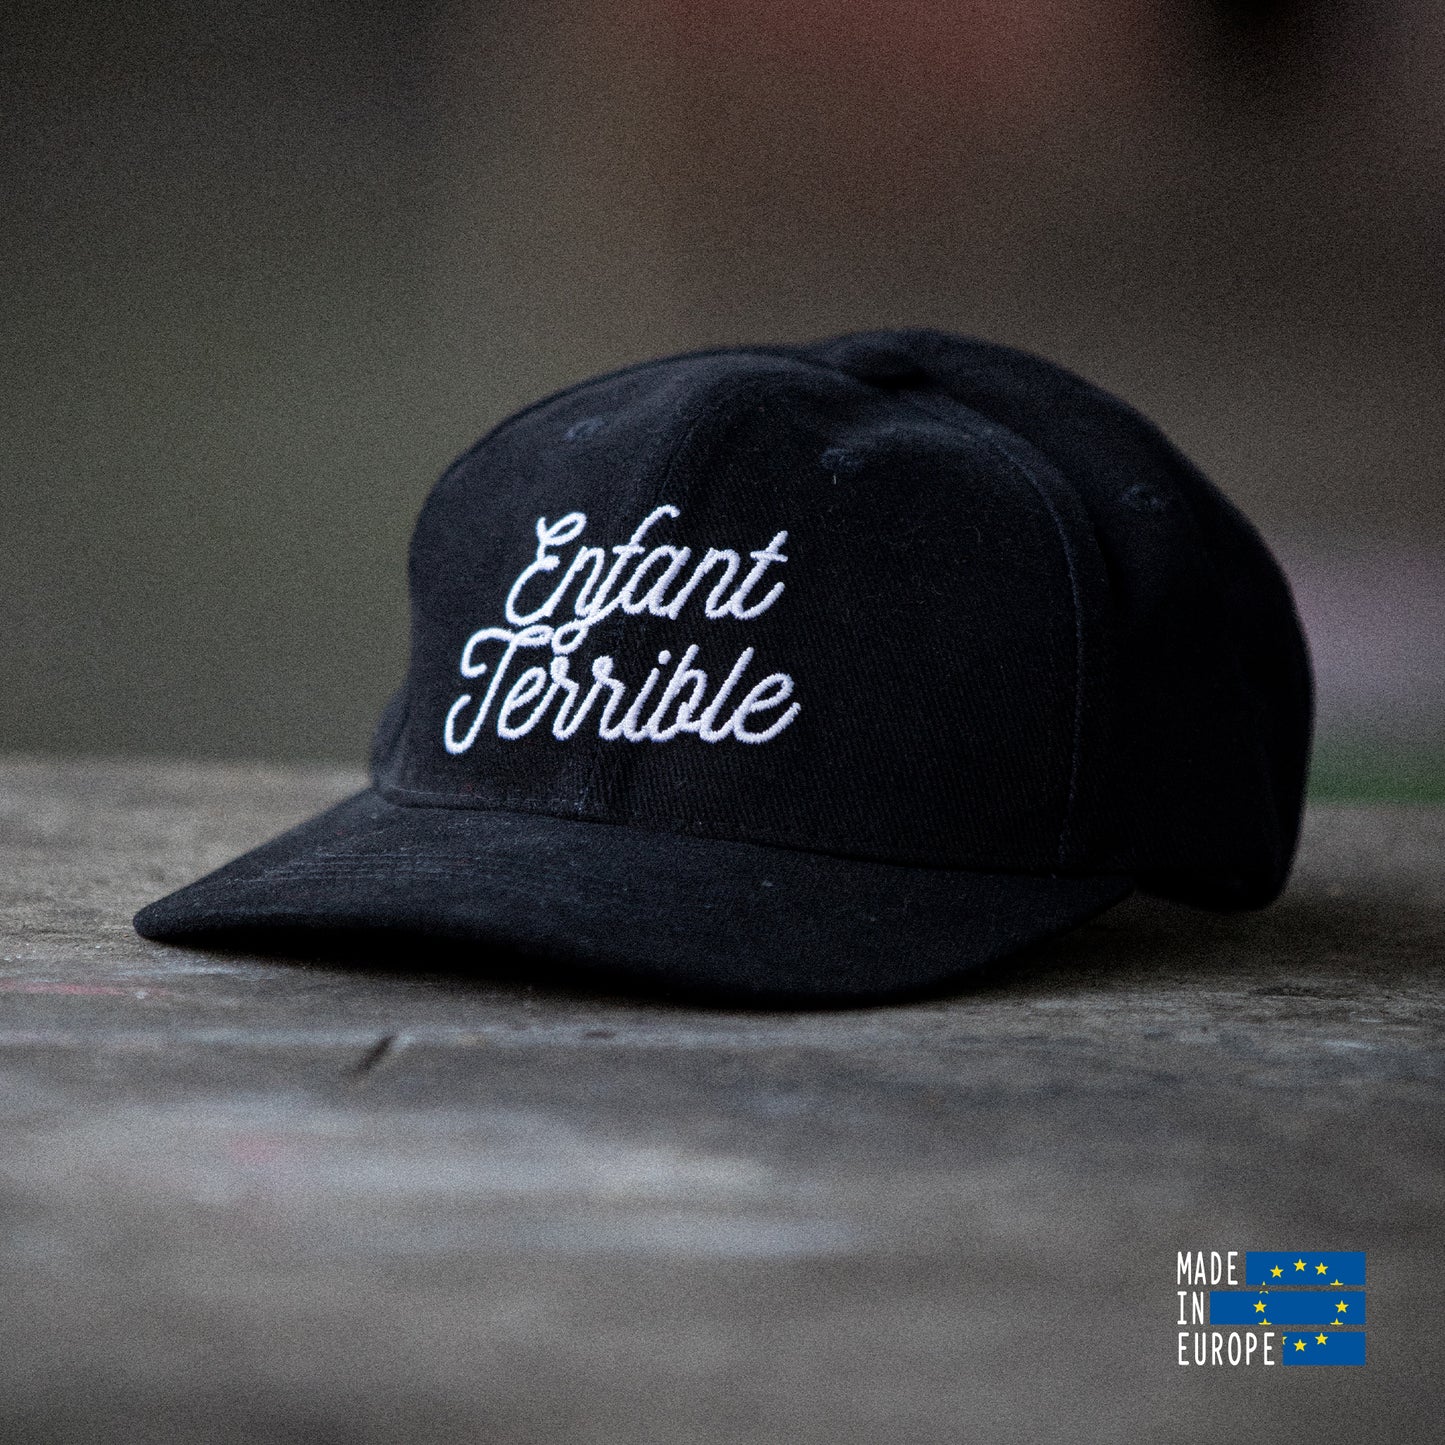 Black cap with embroidery "Enfant Terrible"